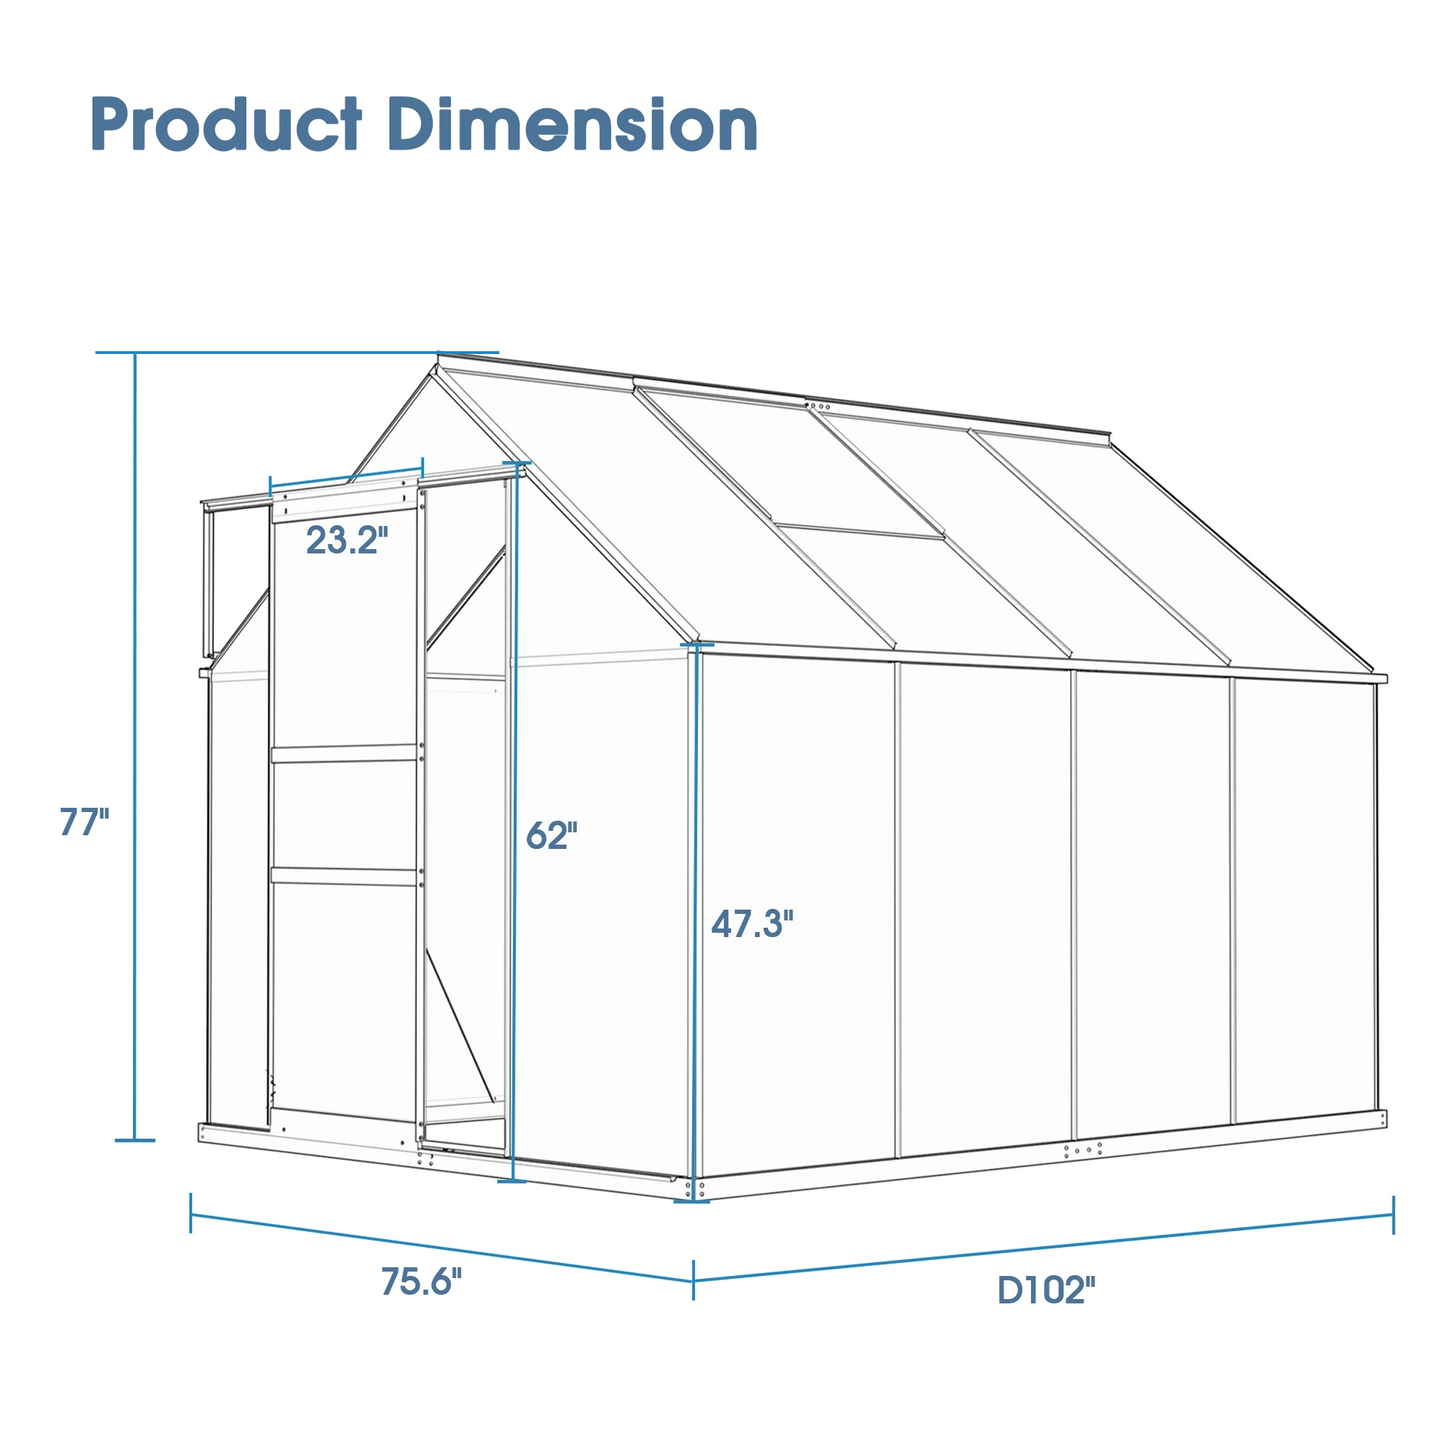 8' L x 6' W Walk-In Polycarbonate Greenhouse: Includes Roof Vent and Sliding Doors, Aluminum Frame - Ideal for Outdoor Gardens and Backyards